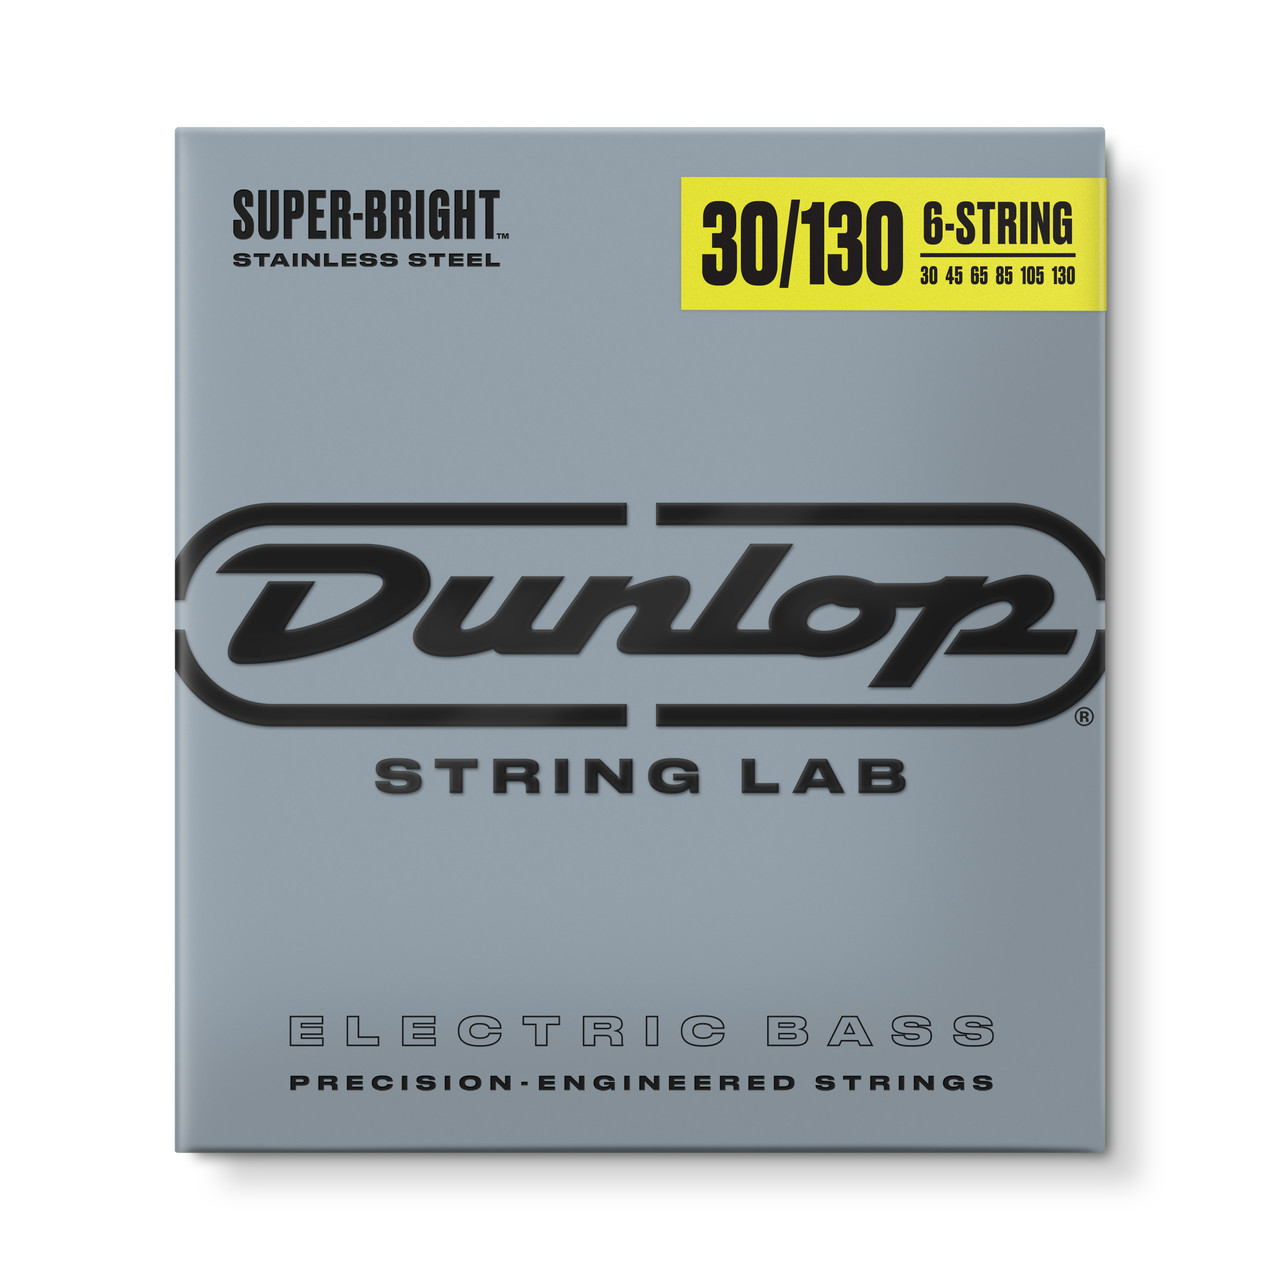 SUPER BRIGHT STAINLESS STEEL BASS STRINGS | 6-STRING